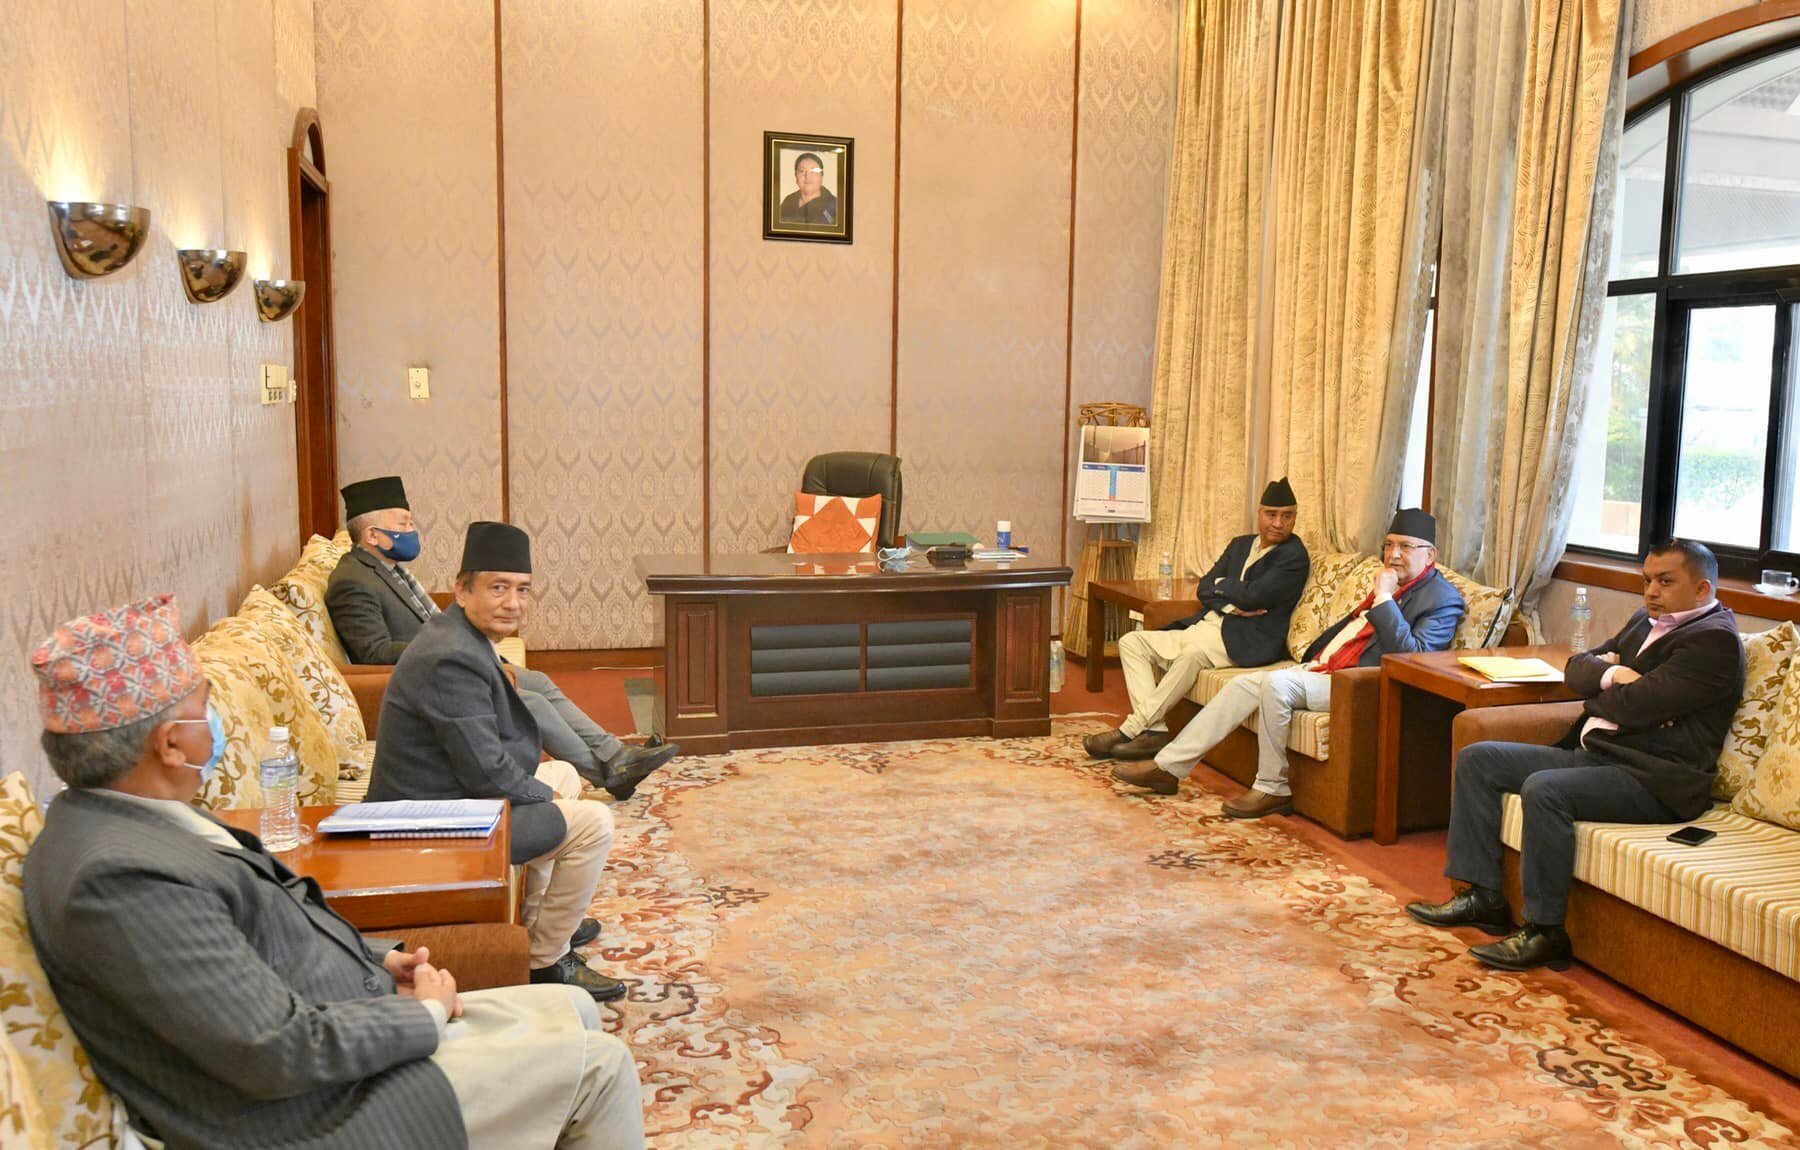 Prime Minister Deuba and UML Chair Oli hold talks after HoR session postponed